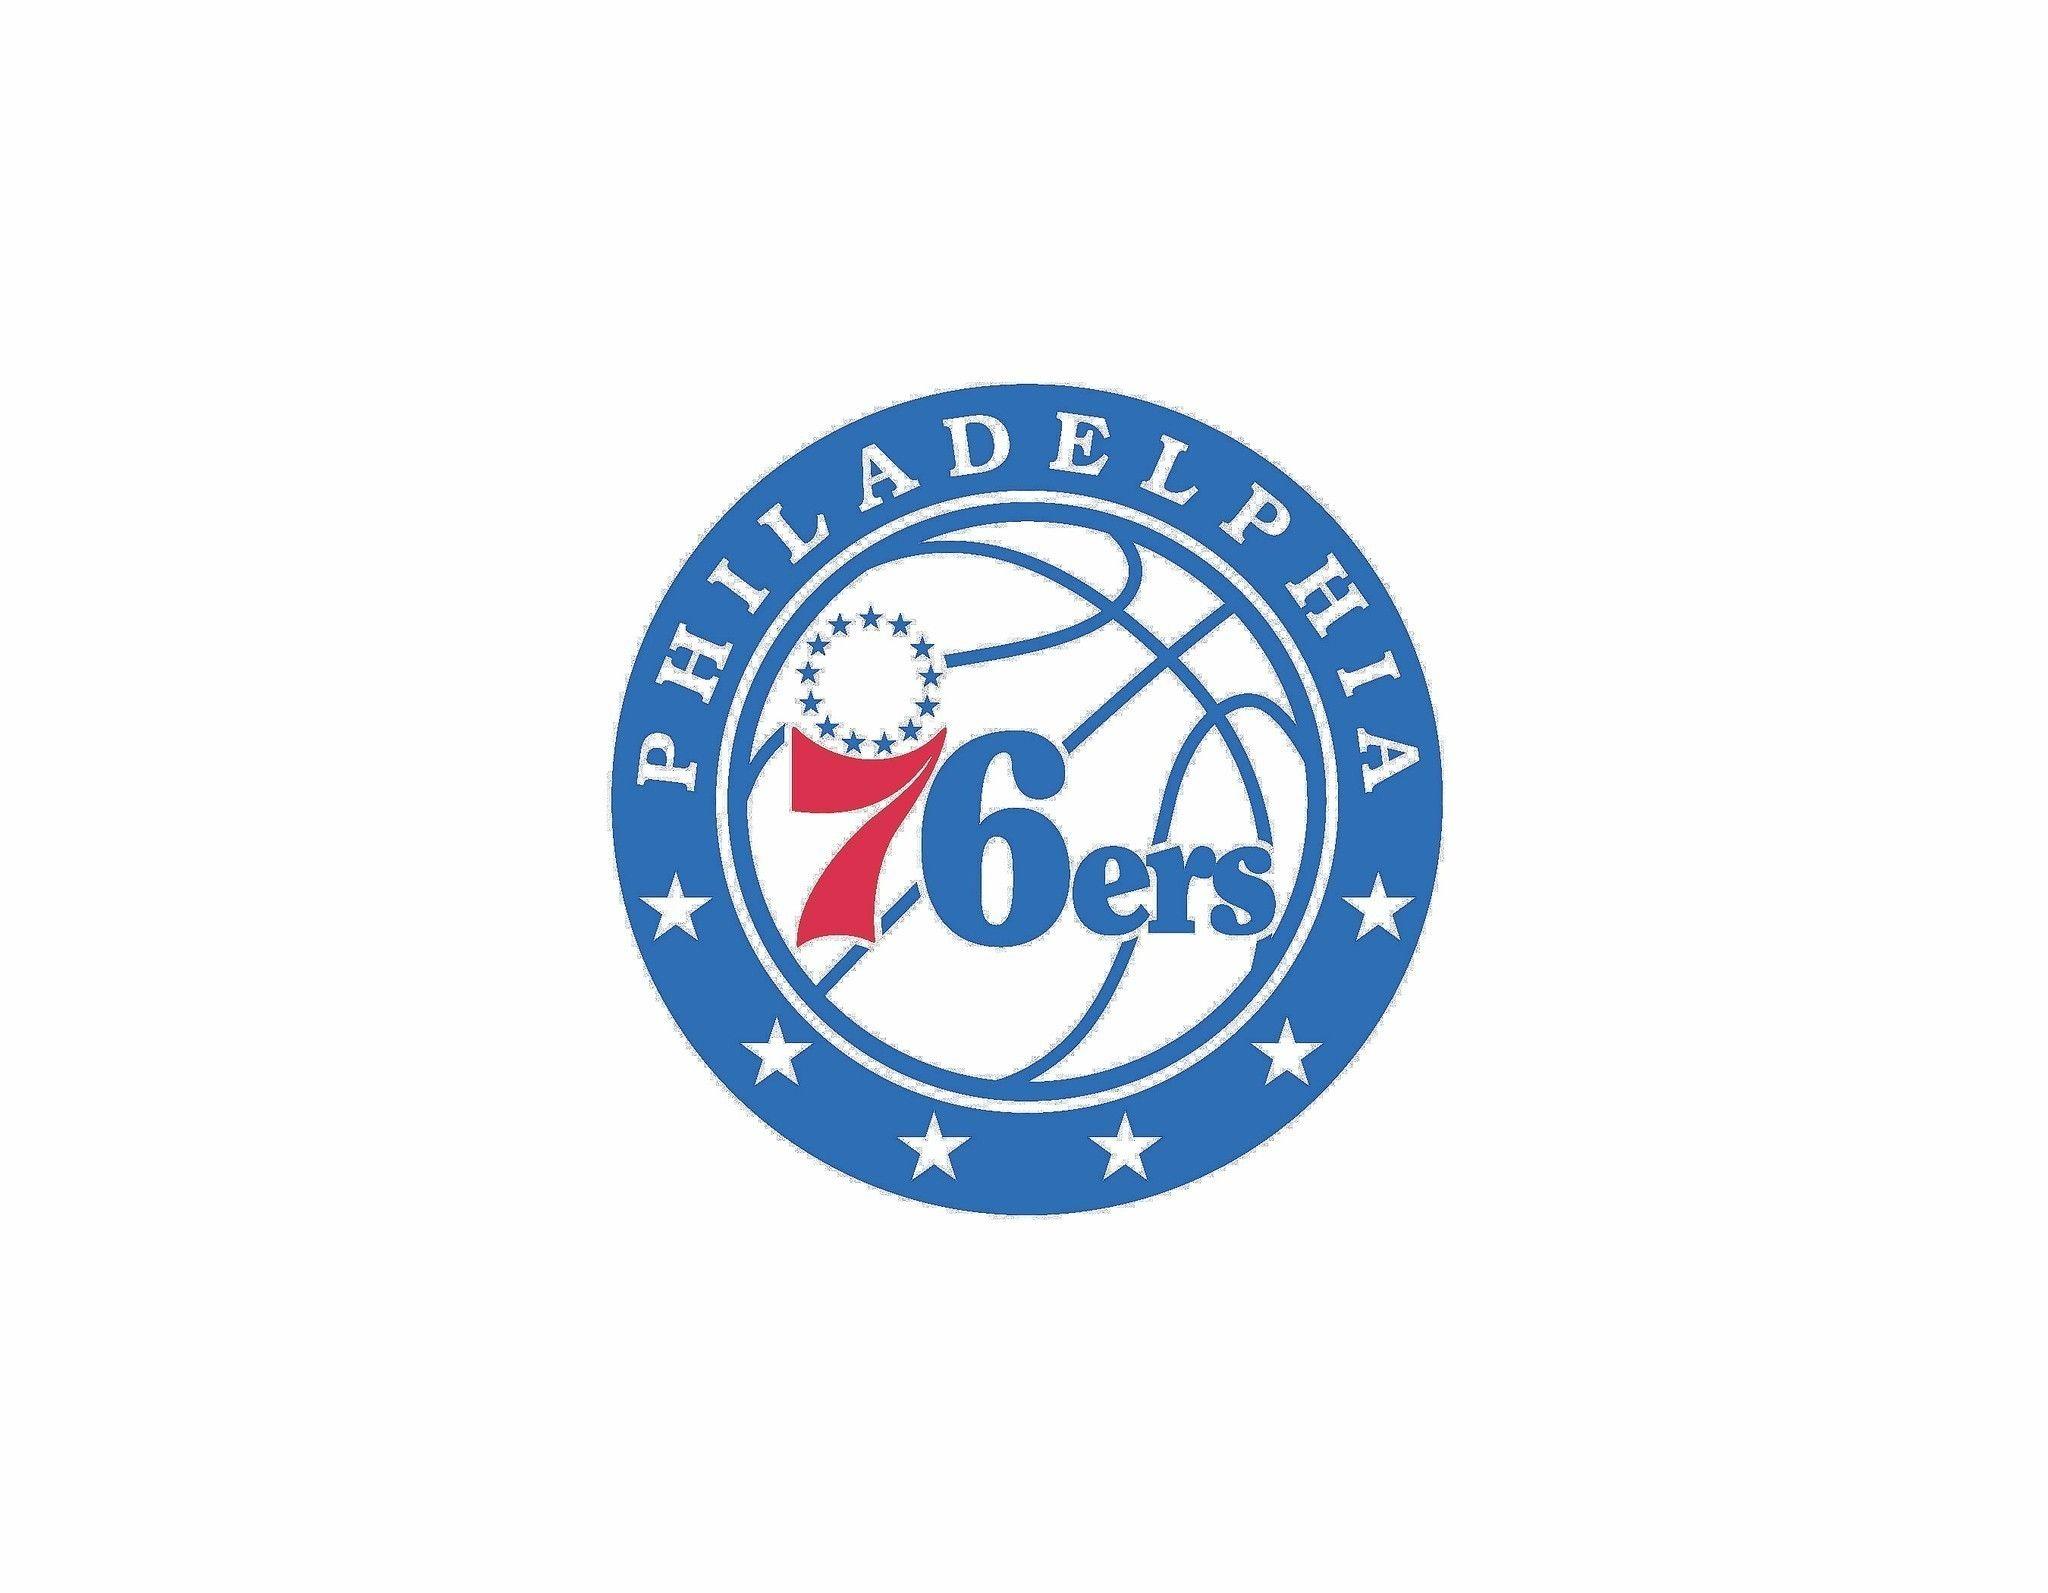 Sixers Logo - Sixers introduce new logos - The Morning Call